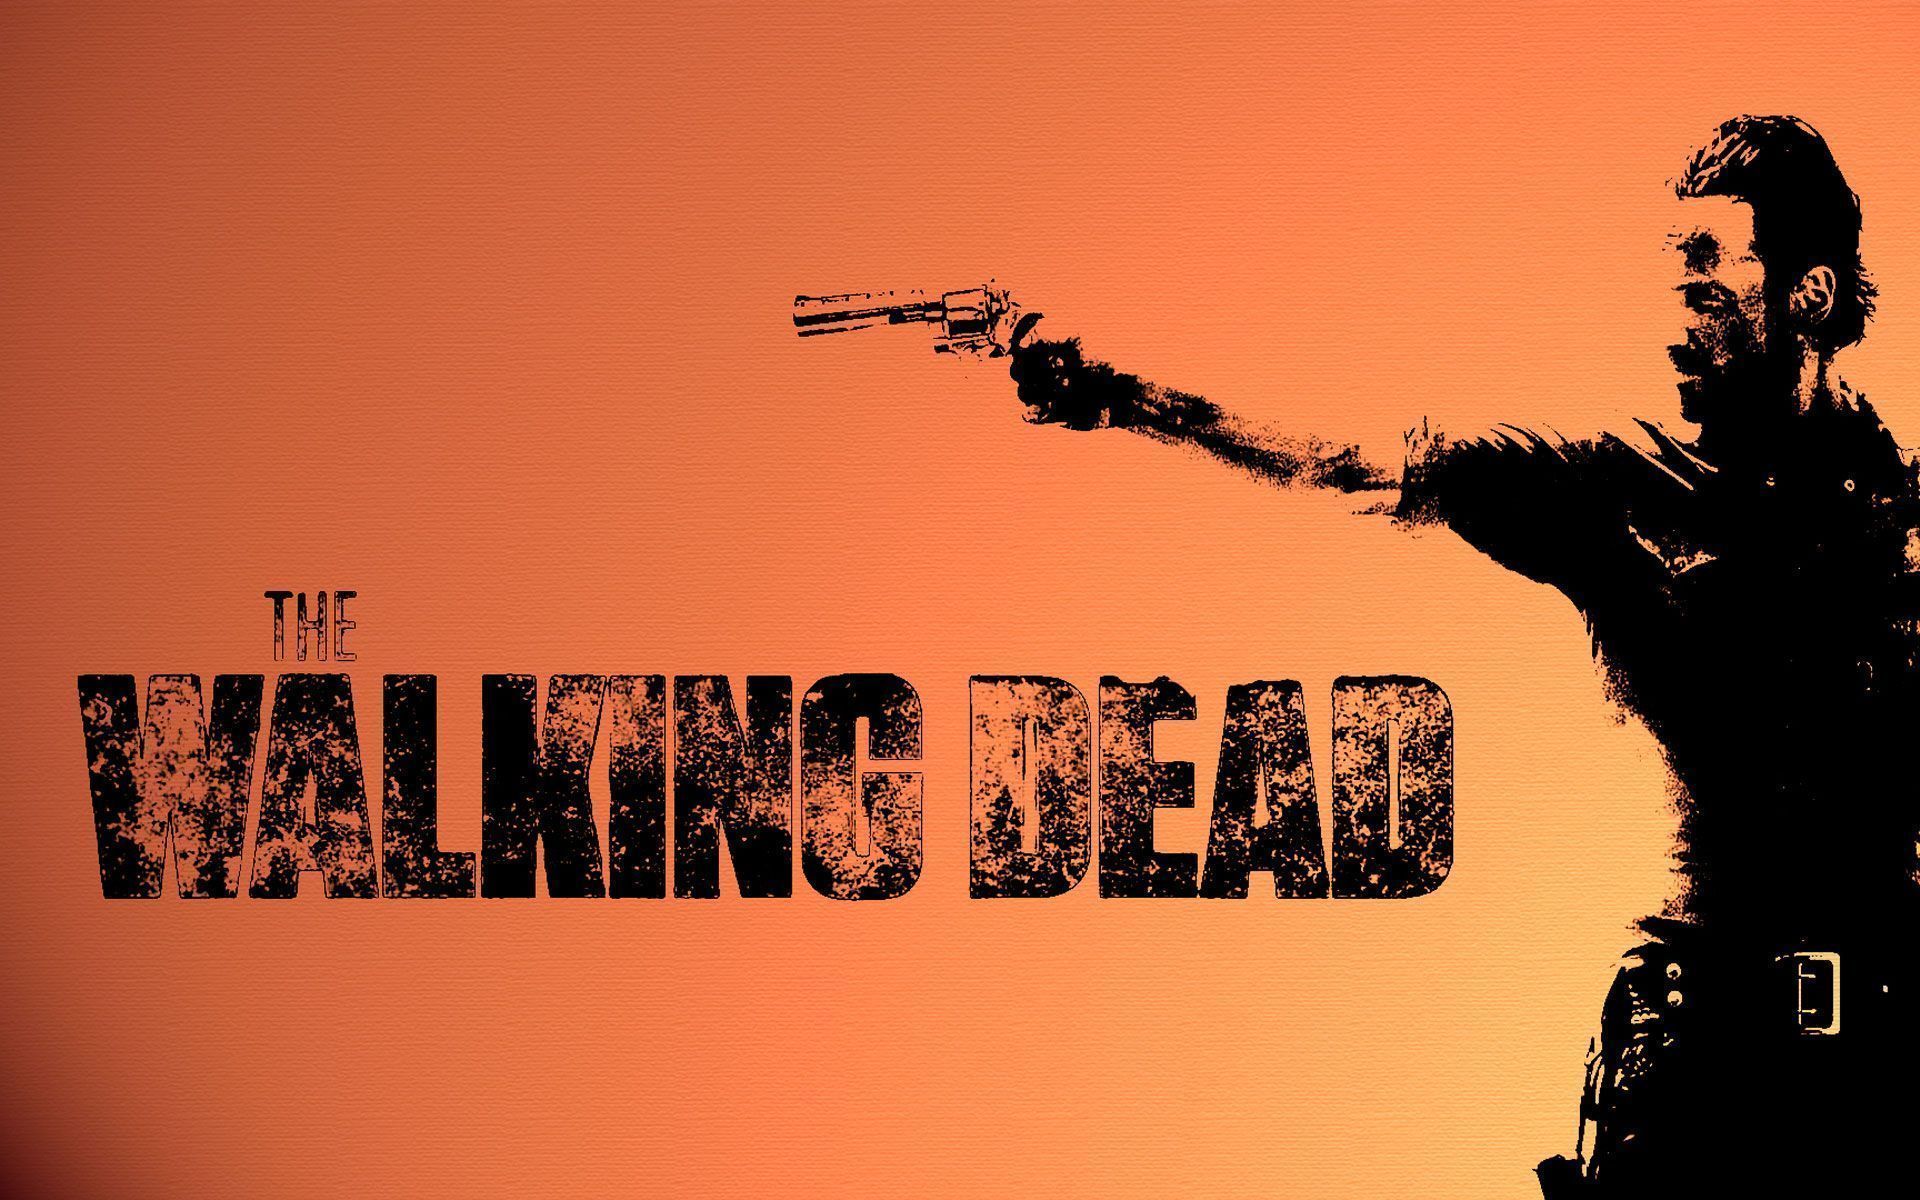 Top Walking Dead Wallpaper For Android Images for Pinterest